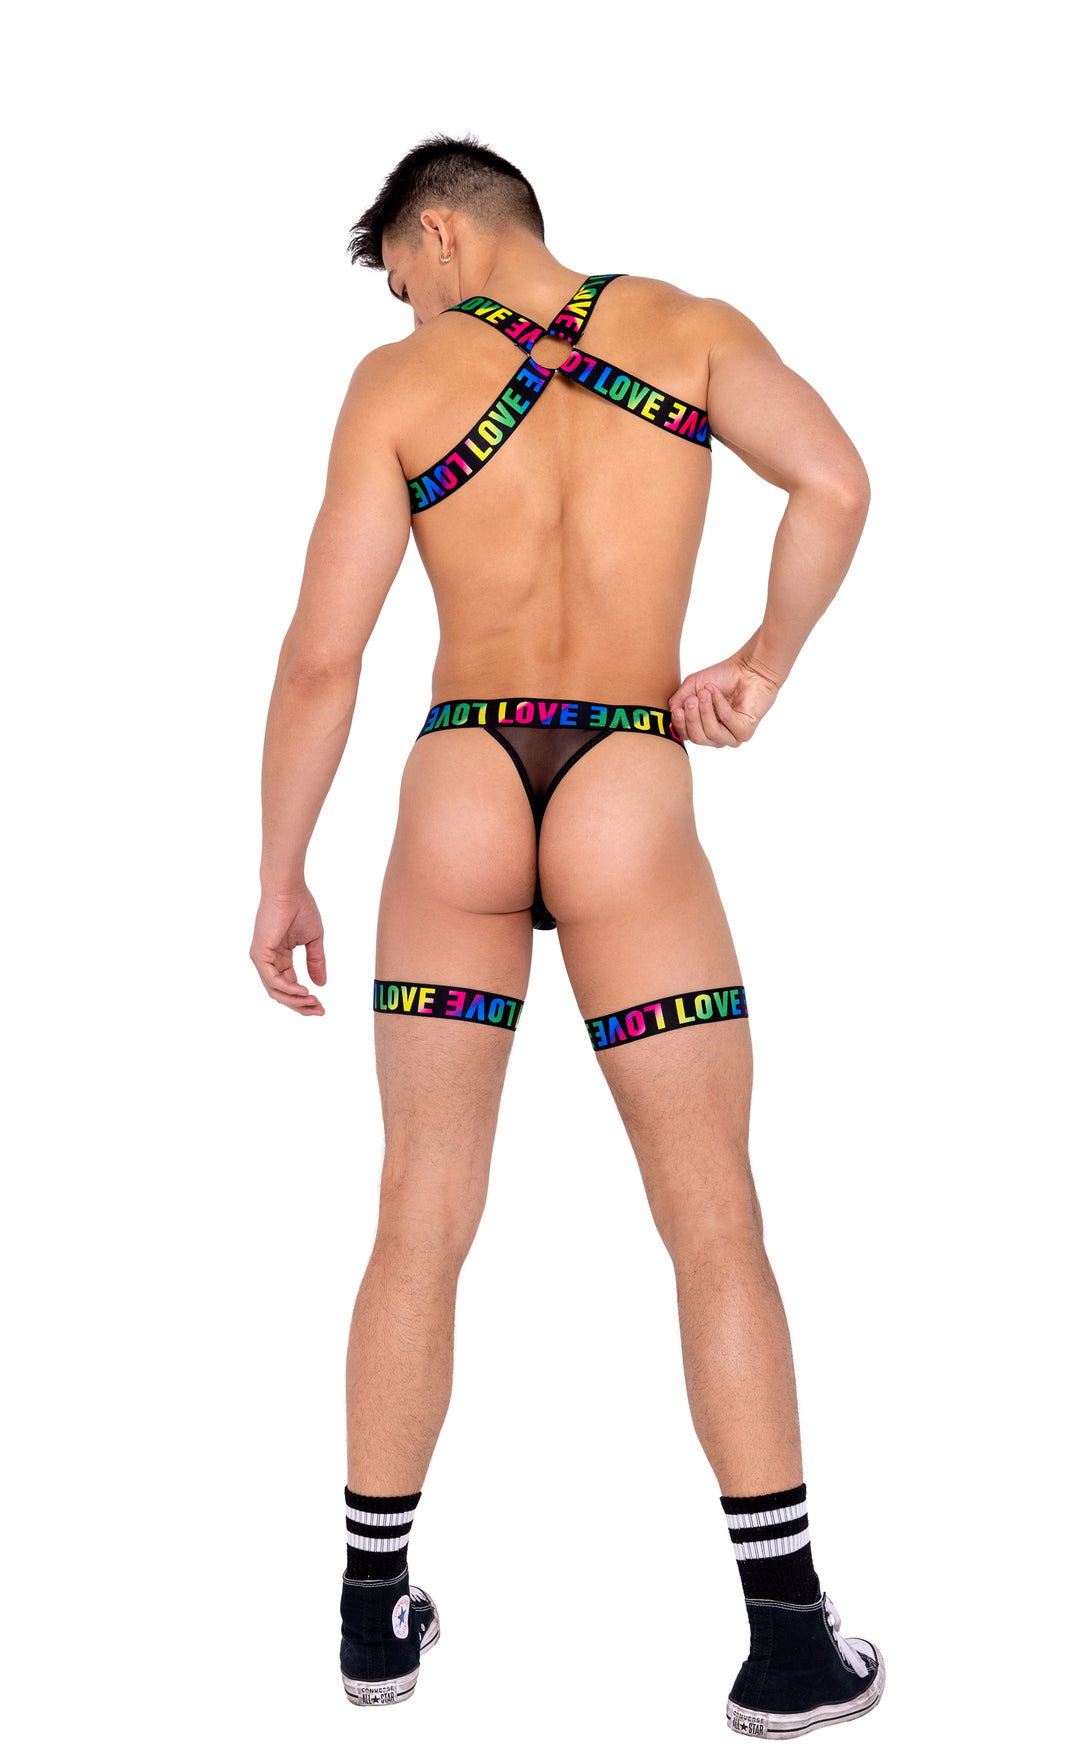 6158 - Men���s Pride Thong with Attached Garters